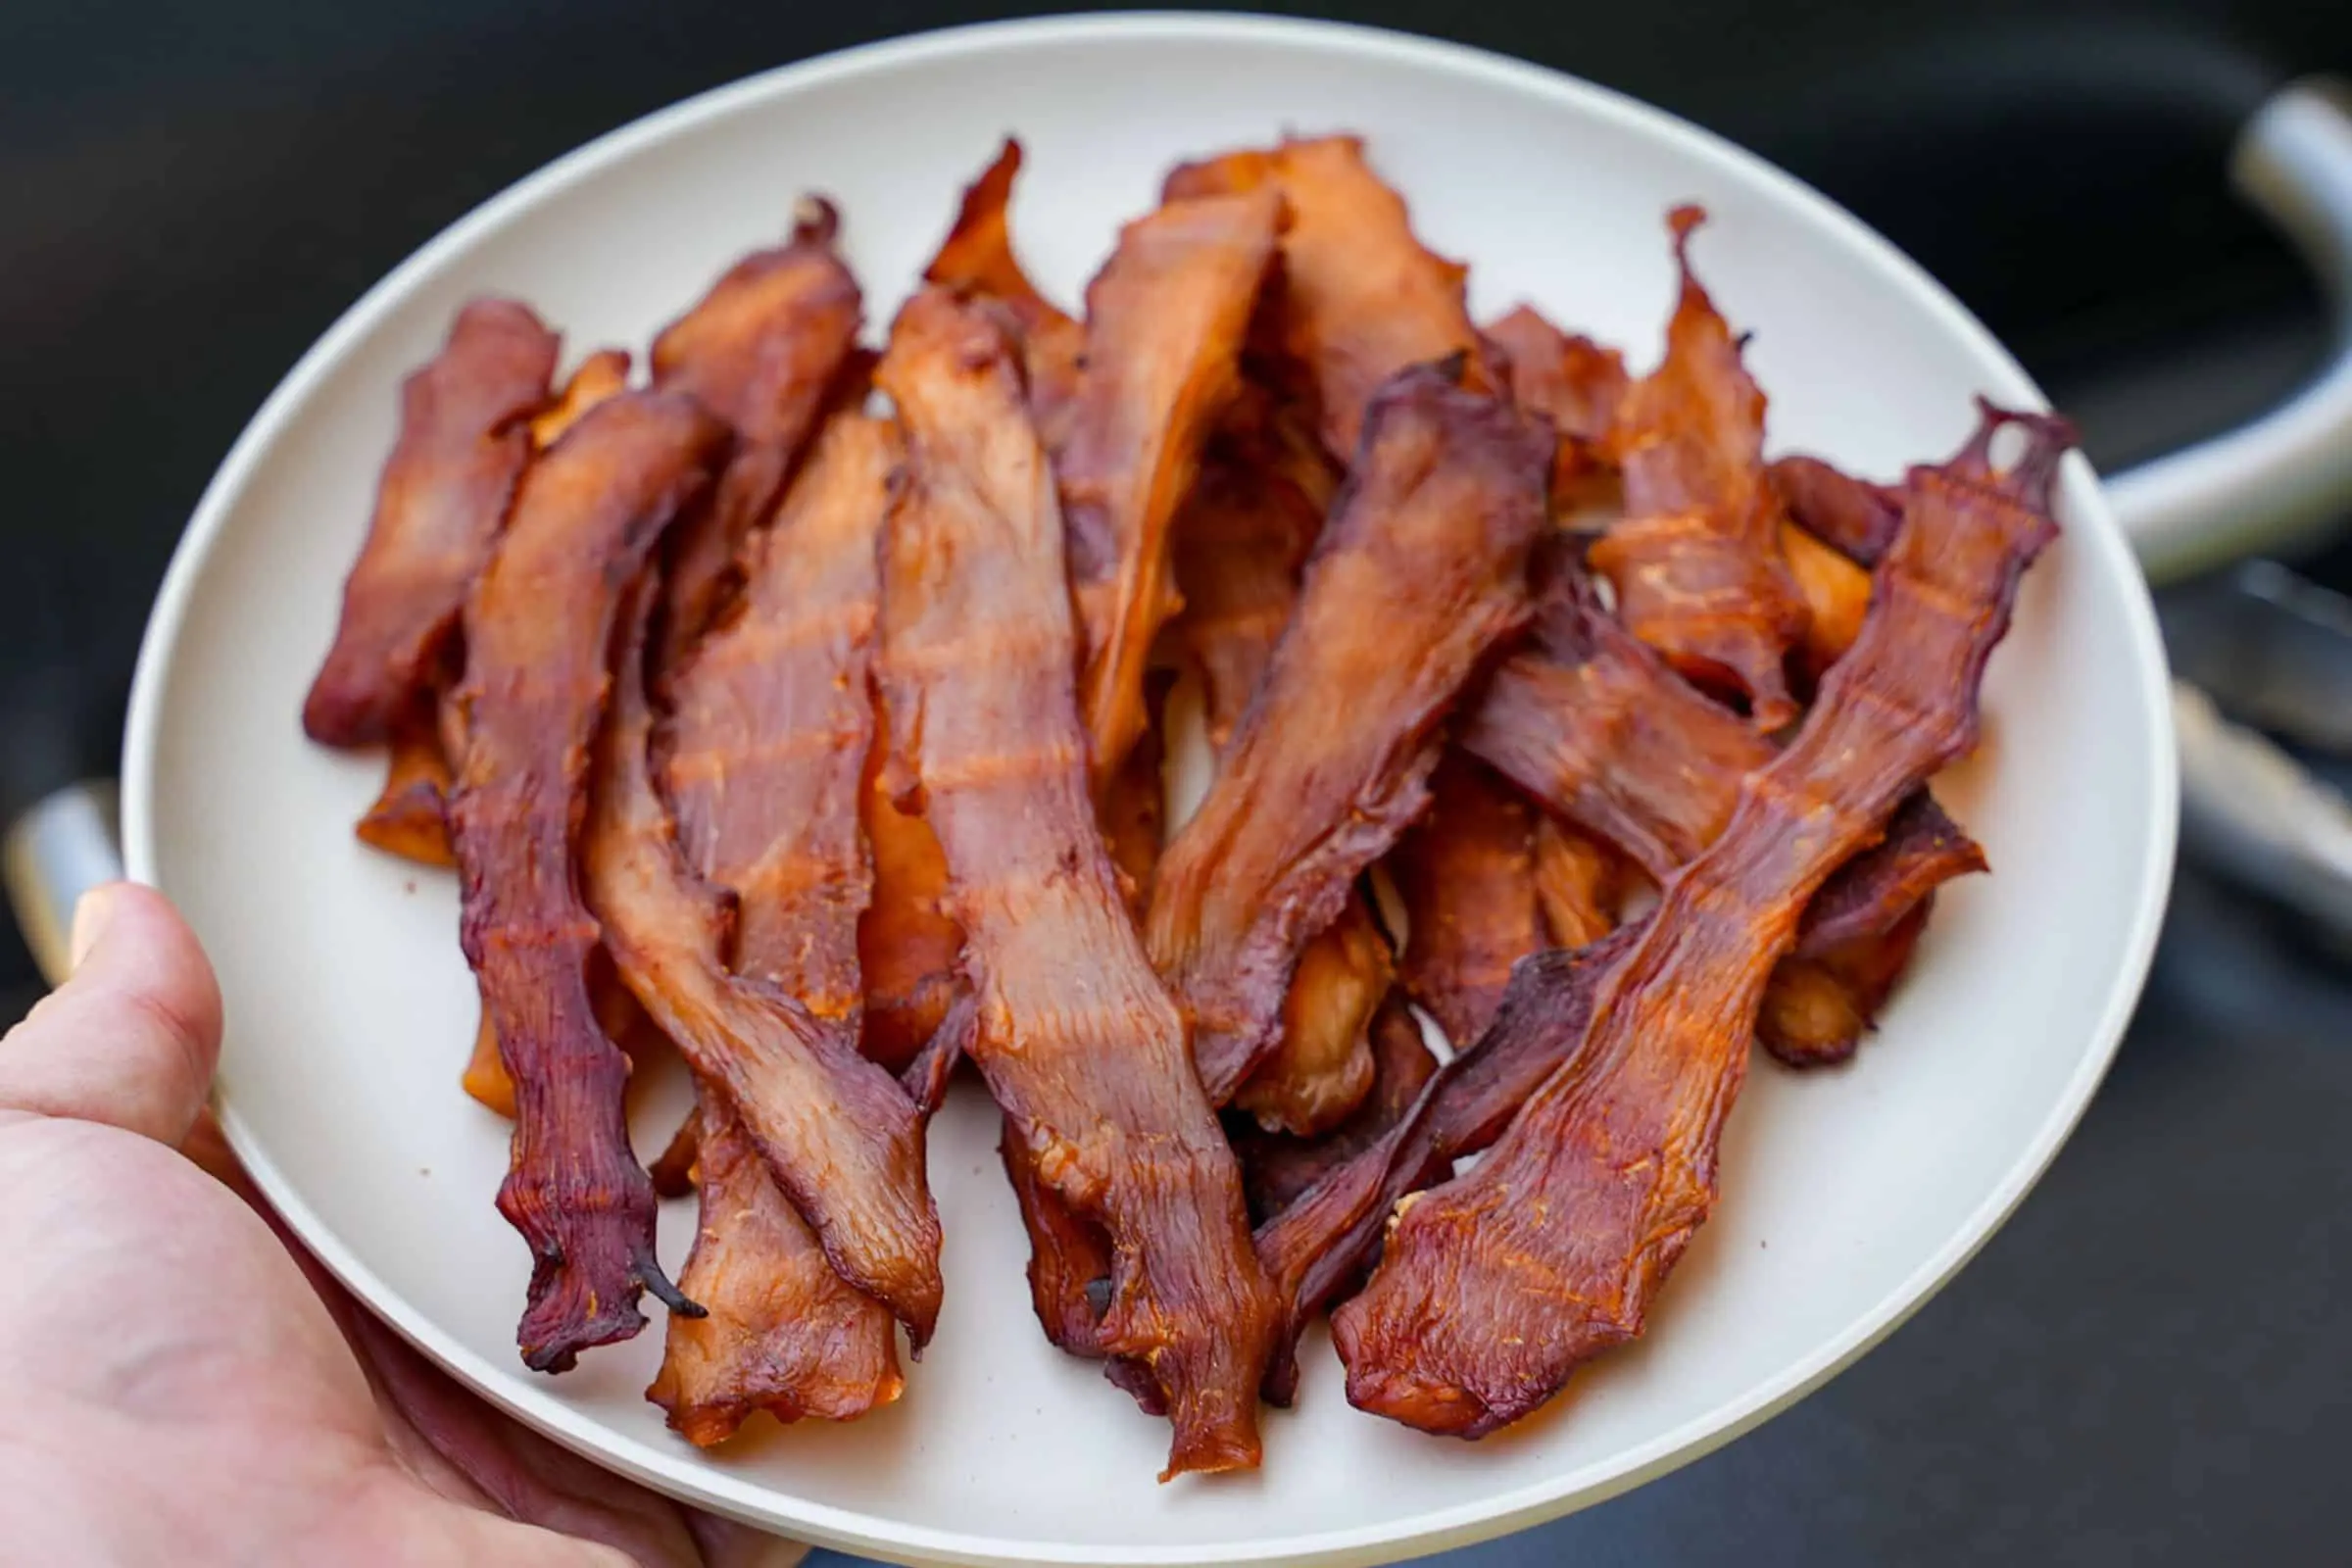 smoked chicken jerky recipe - Is chicken jerky good for you